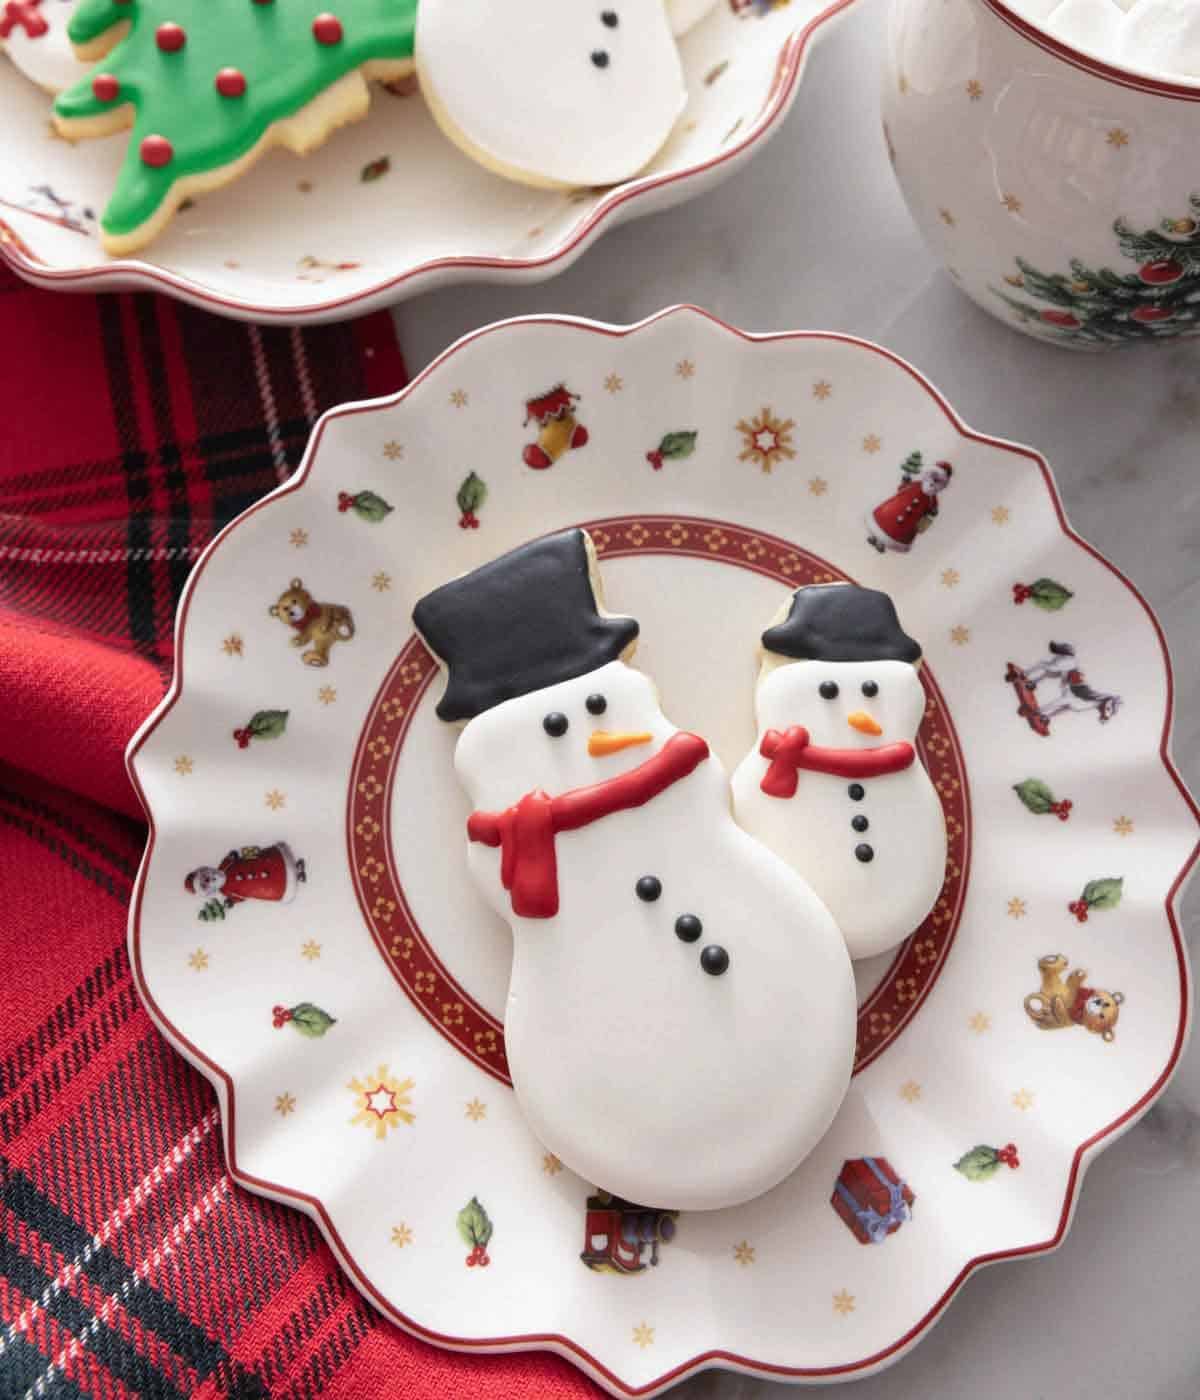 A plate with two snowman cookies decorated with royal icing.